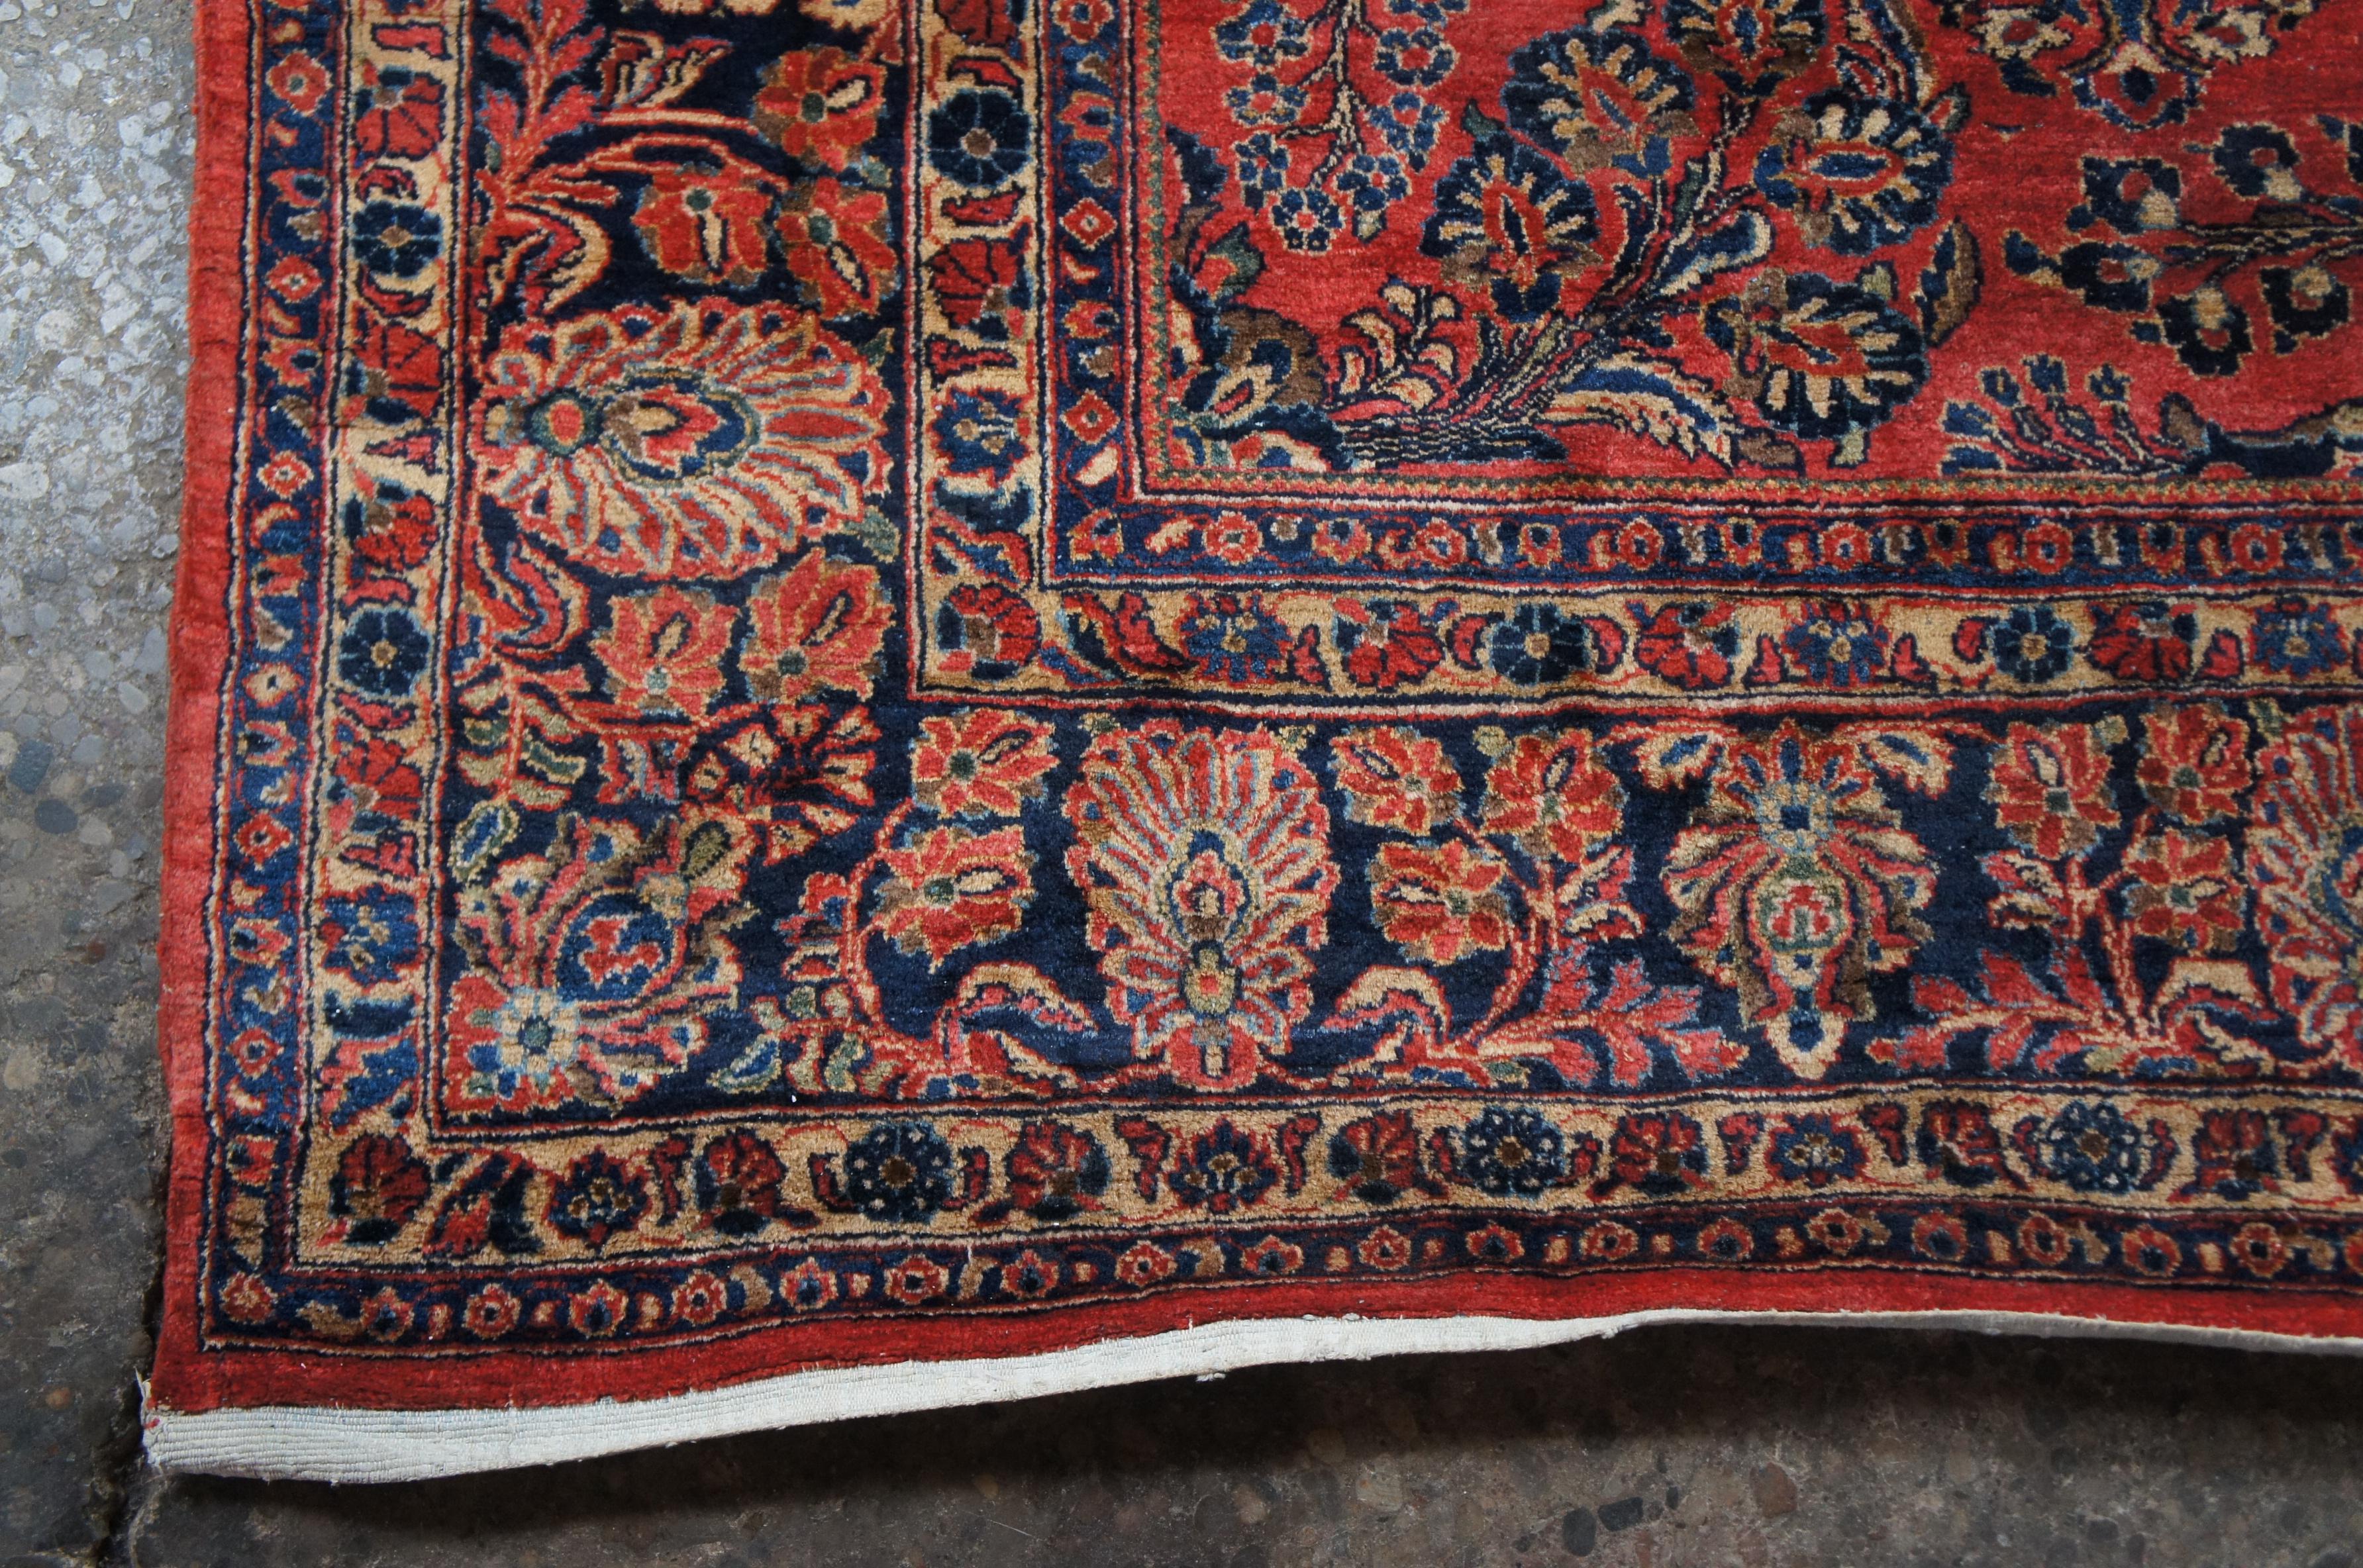 20th Century Vintage Persian Sarouk Hand Knotted Red Floral Wool Area Rug Carpet 9' x 12' For Sale